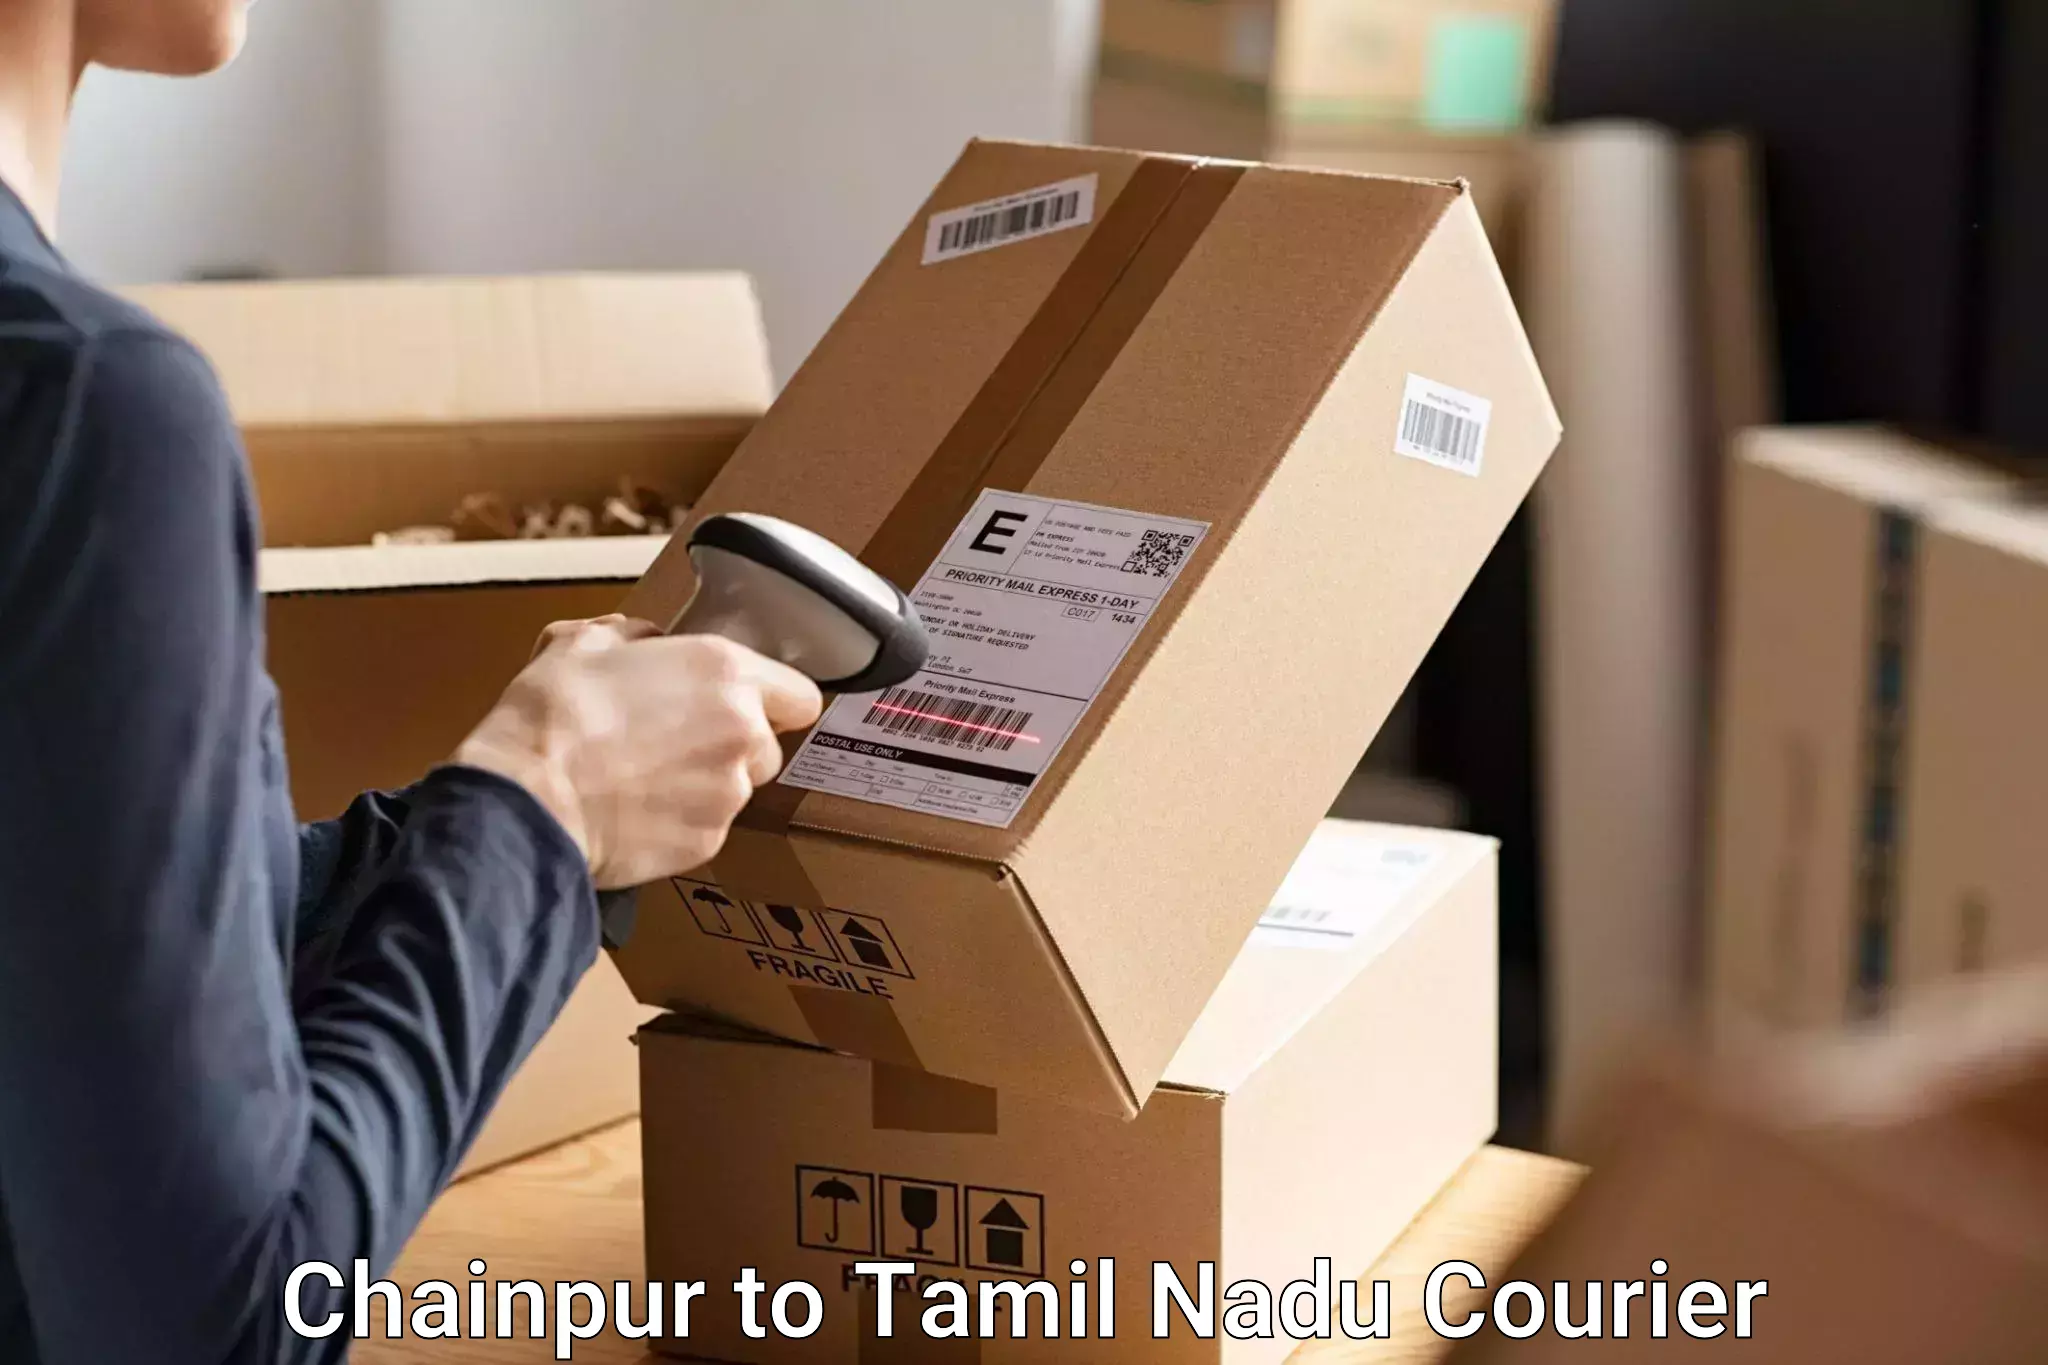 Luggage transfer service Chainpur to Ennore Port Chennai